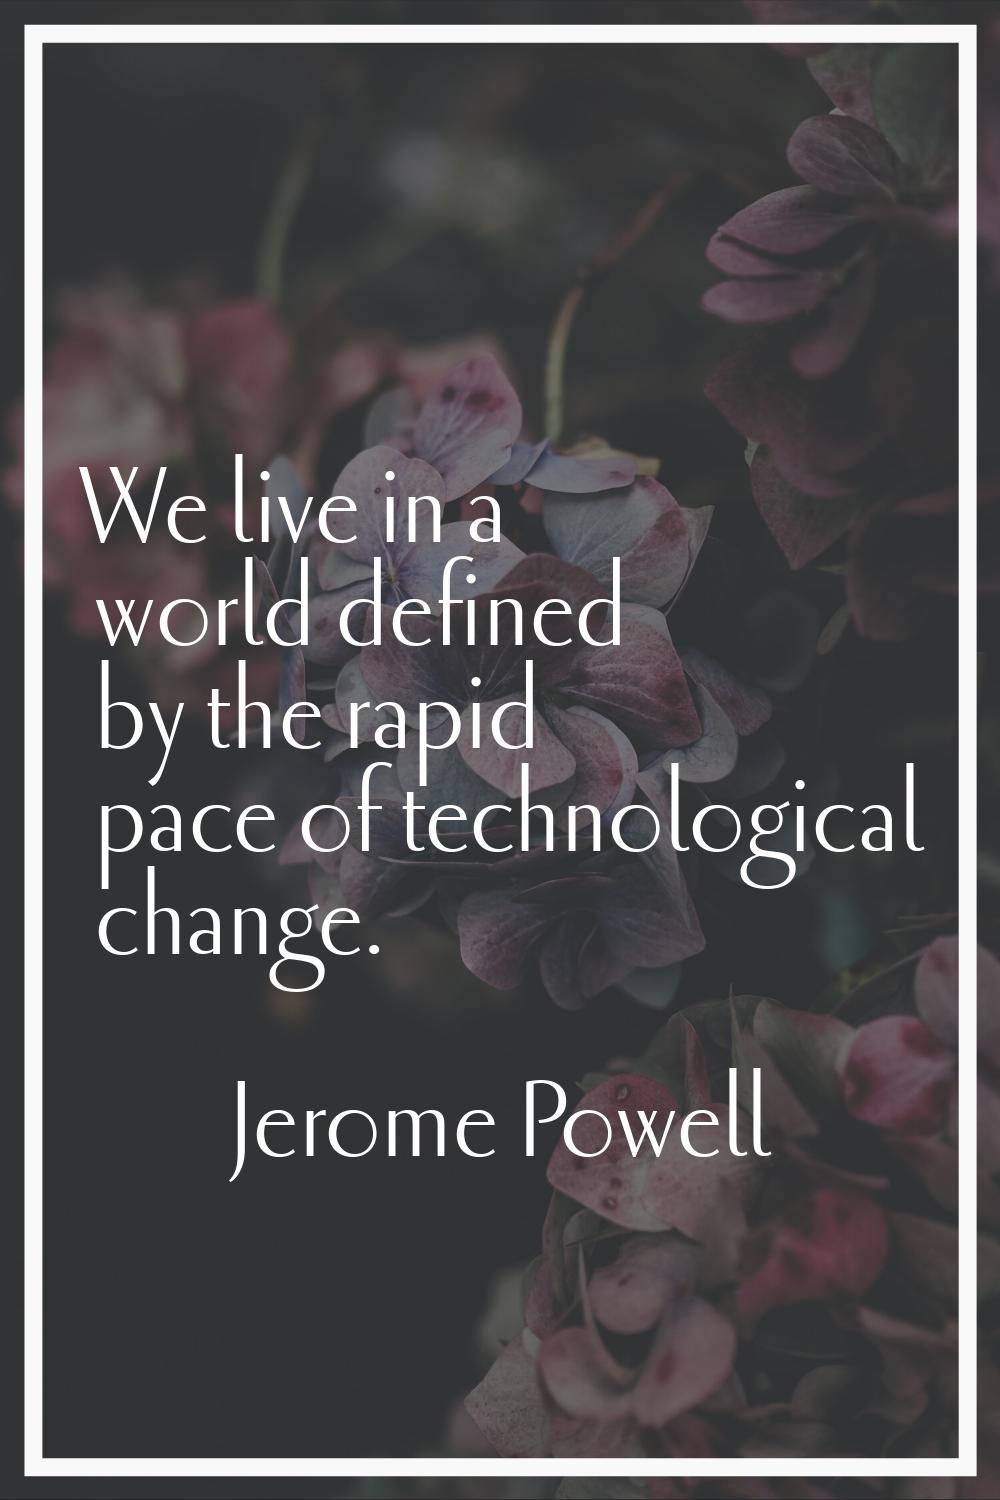 We live in a world defined by the rapid pace of technological change.